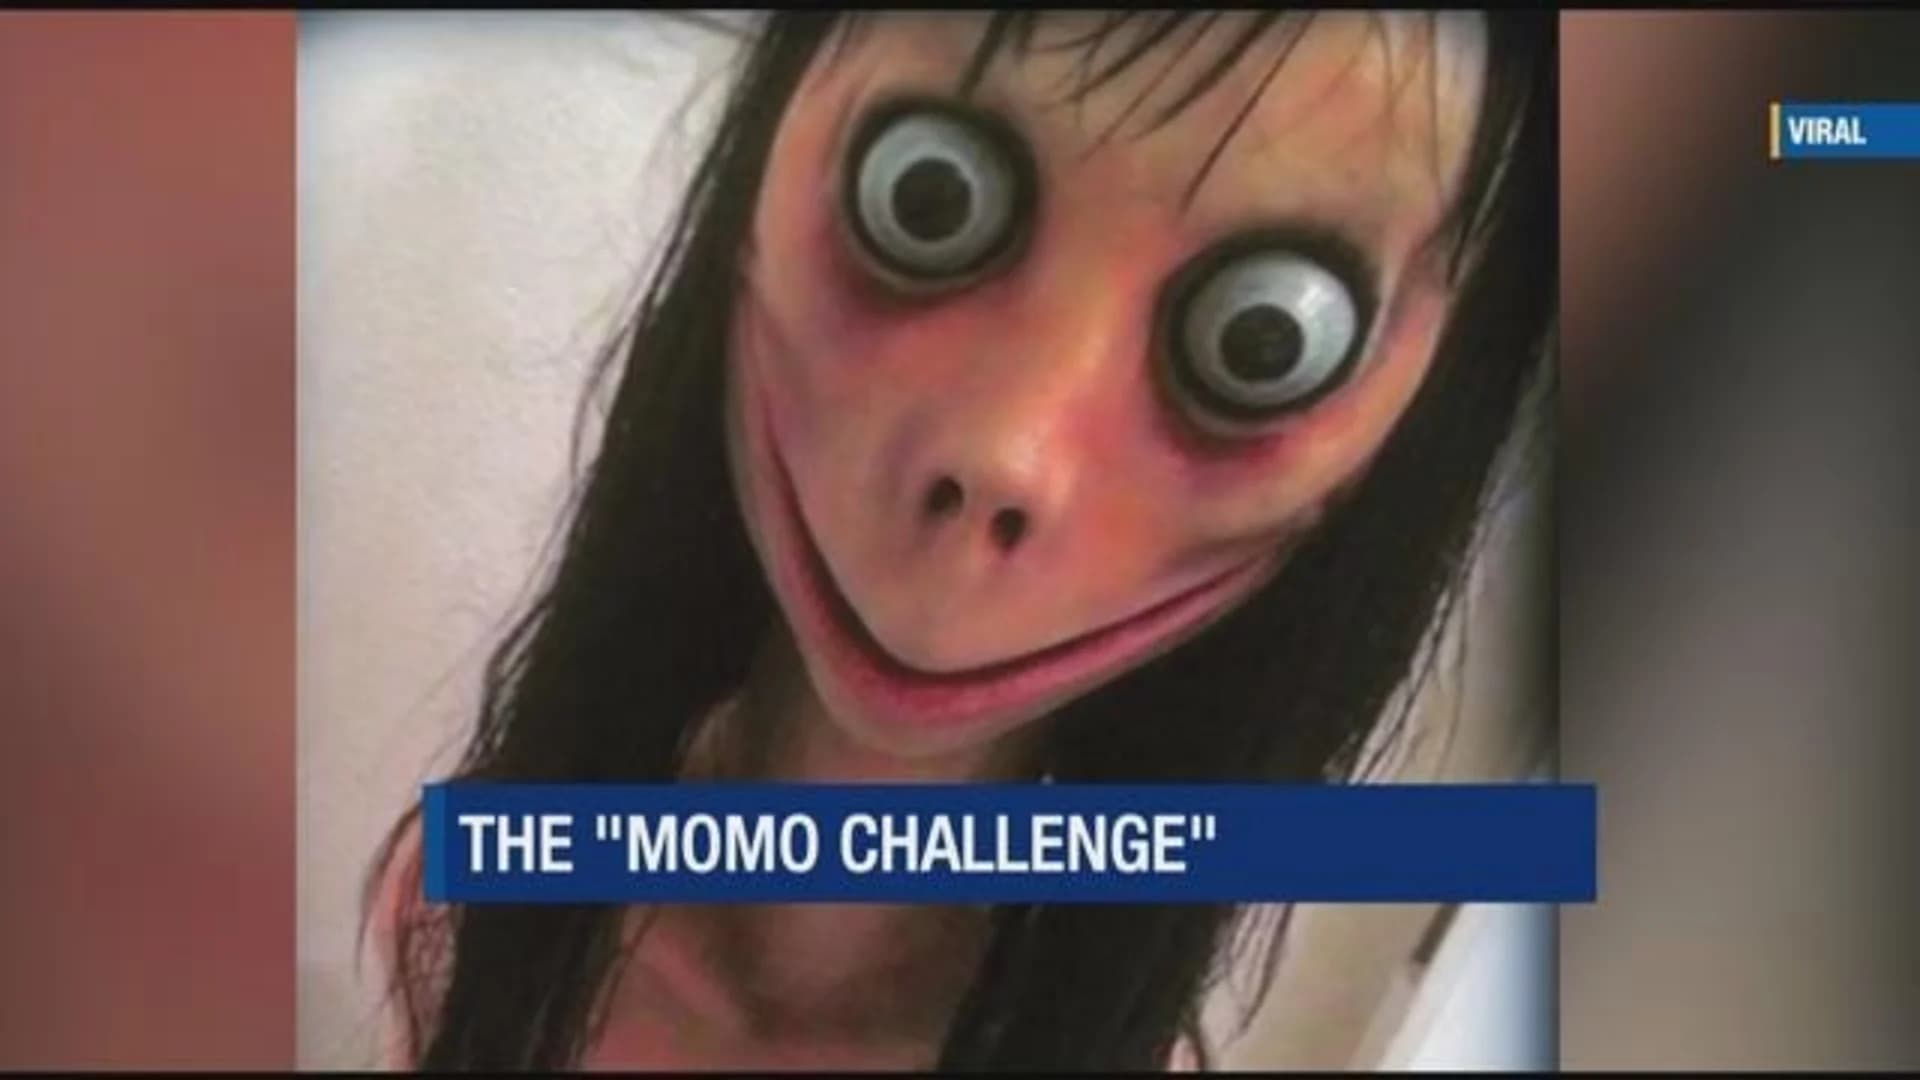 Parents concerned about so-called viral ‘Momo Challenge’ threat